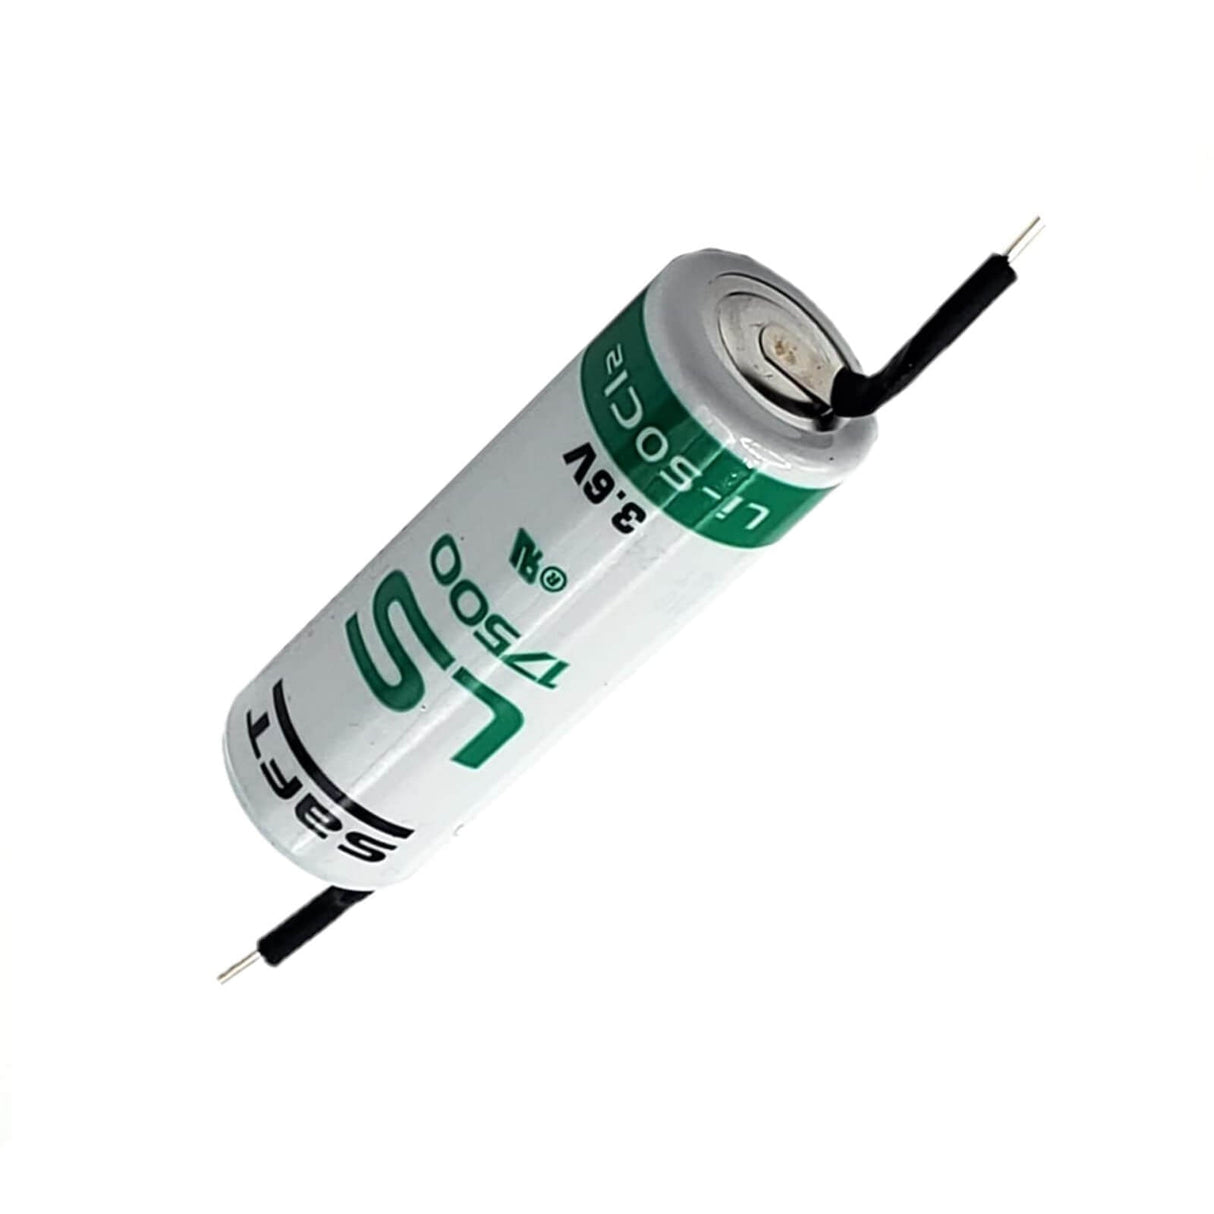 Saft Ls17500 A-size 3.6v 3600mah Long Axial Style Pc Pin Battery Battery By Use Saft Lithium Batteries   